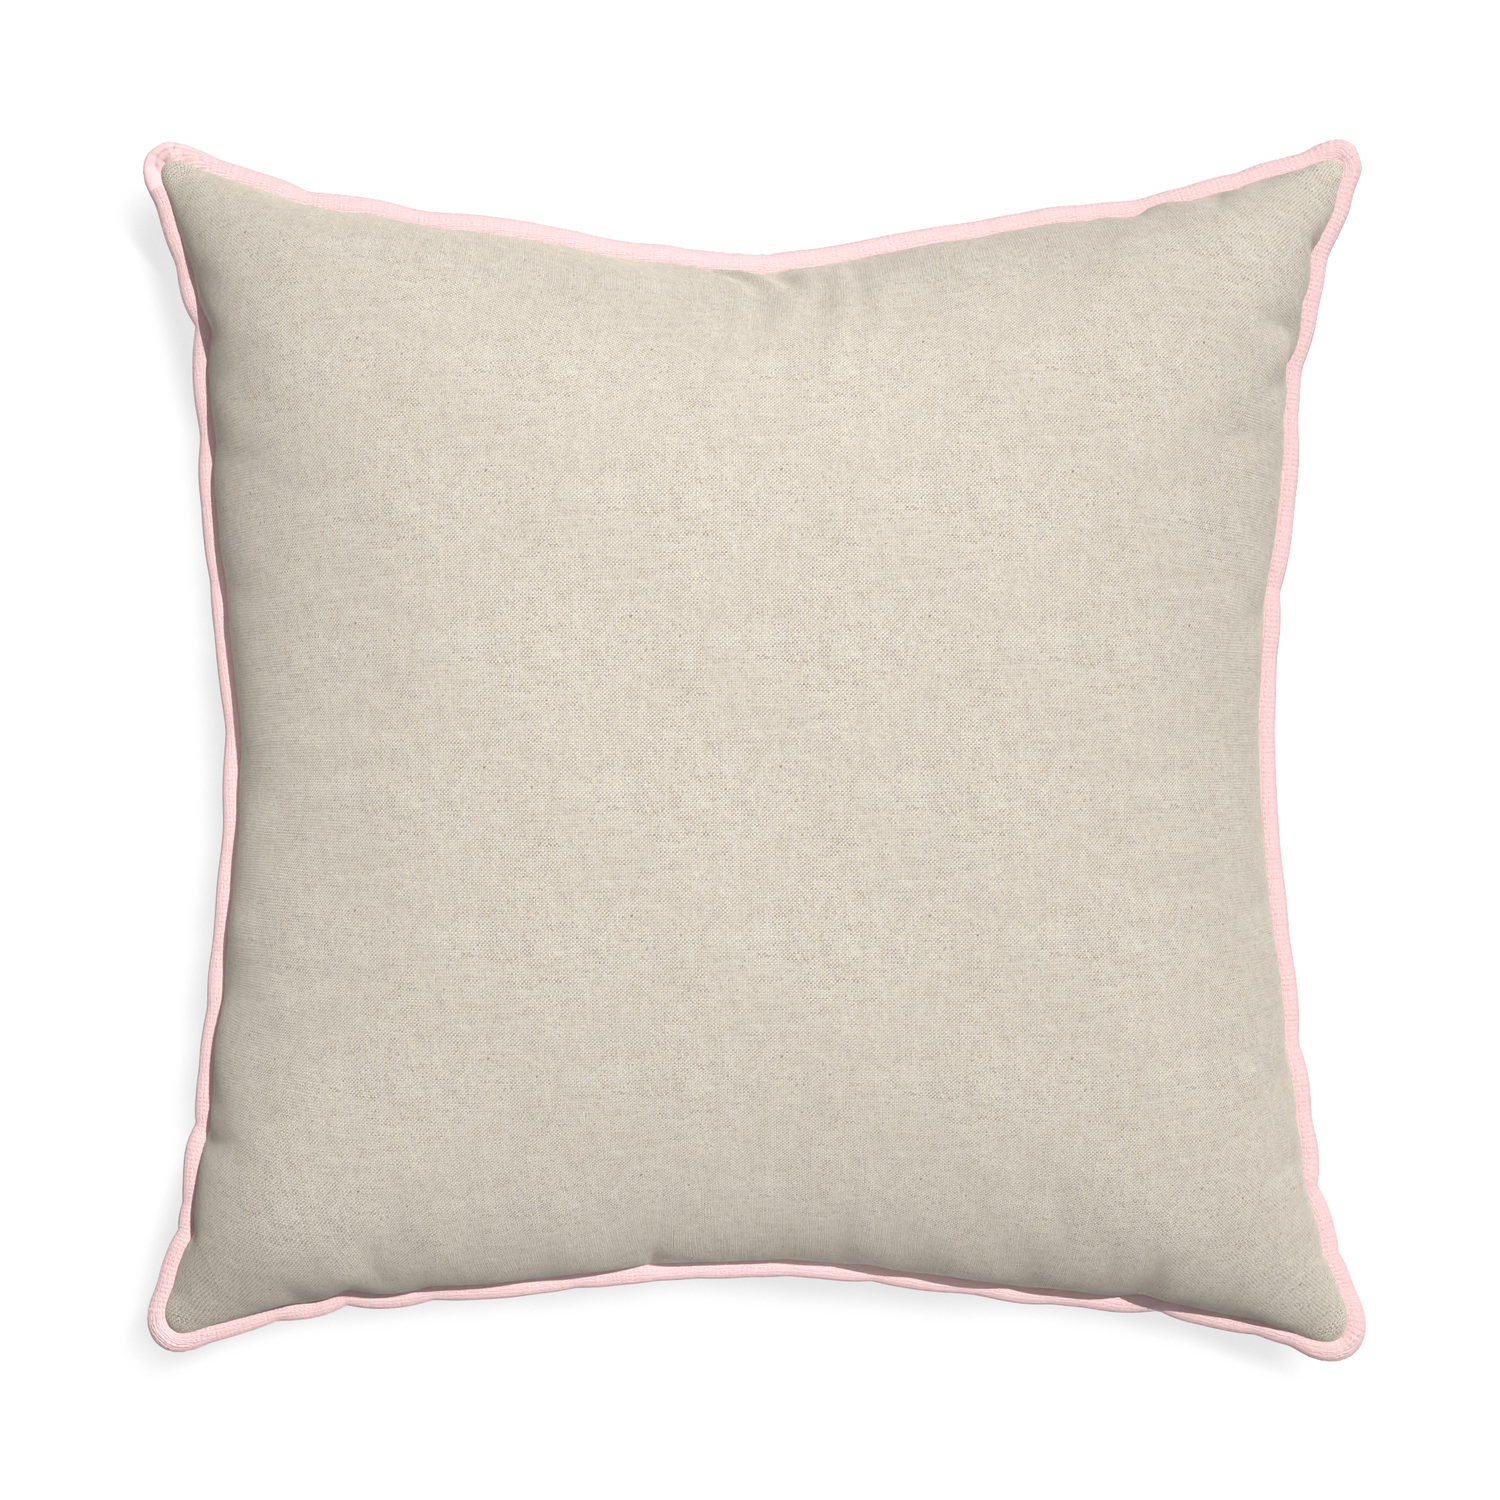 Euro-sham oat custom light brownpillow with petal piping on white background